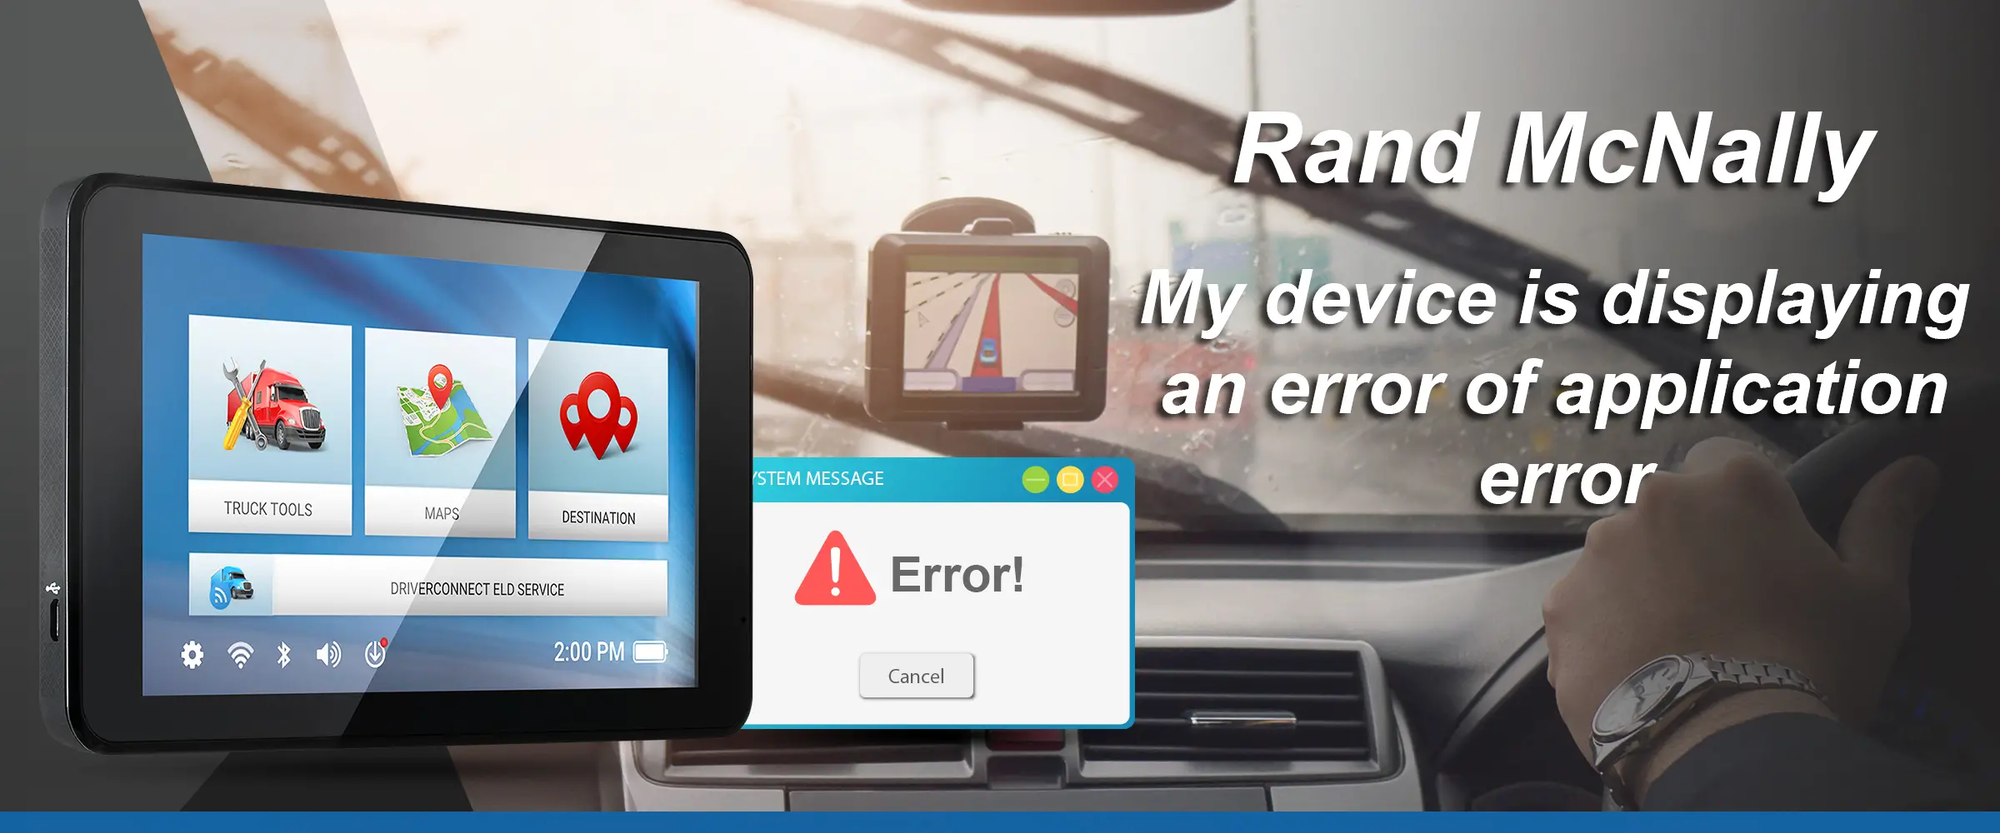 Rand McNally - My Device is displaying an error of Application Error